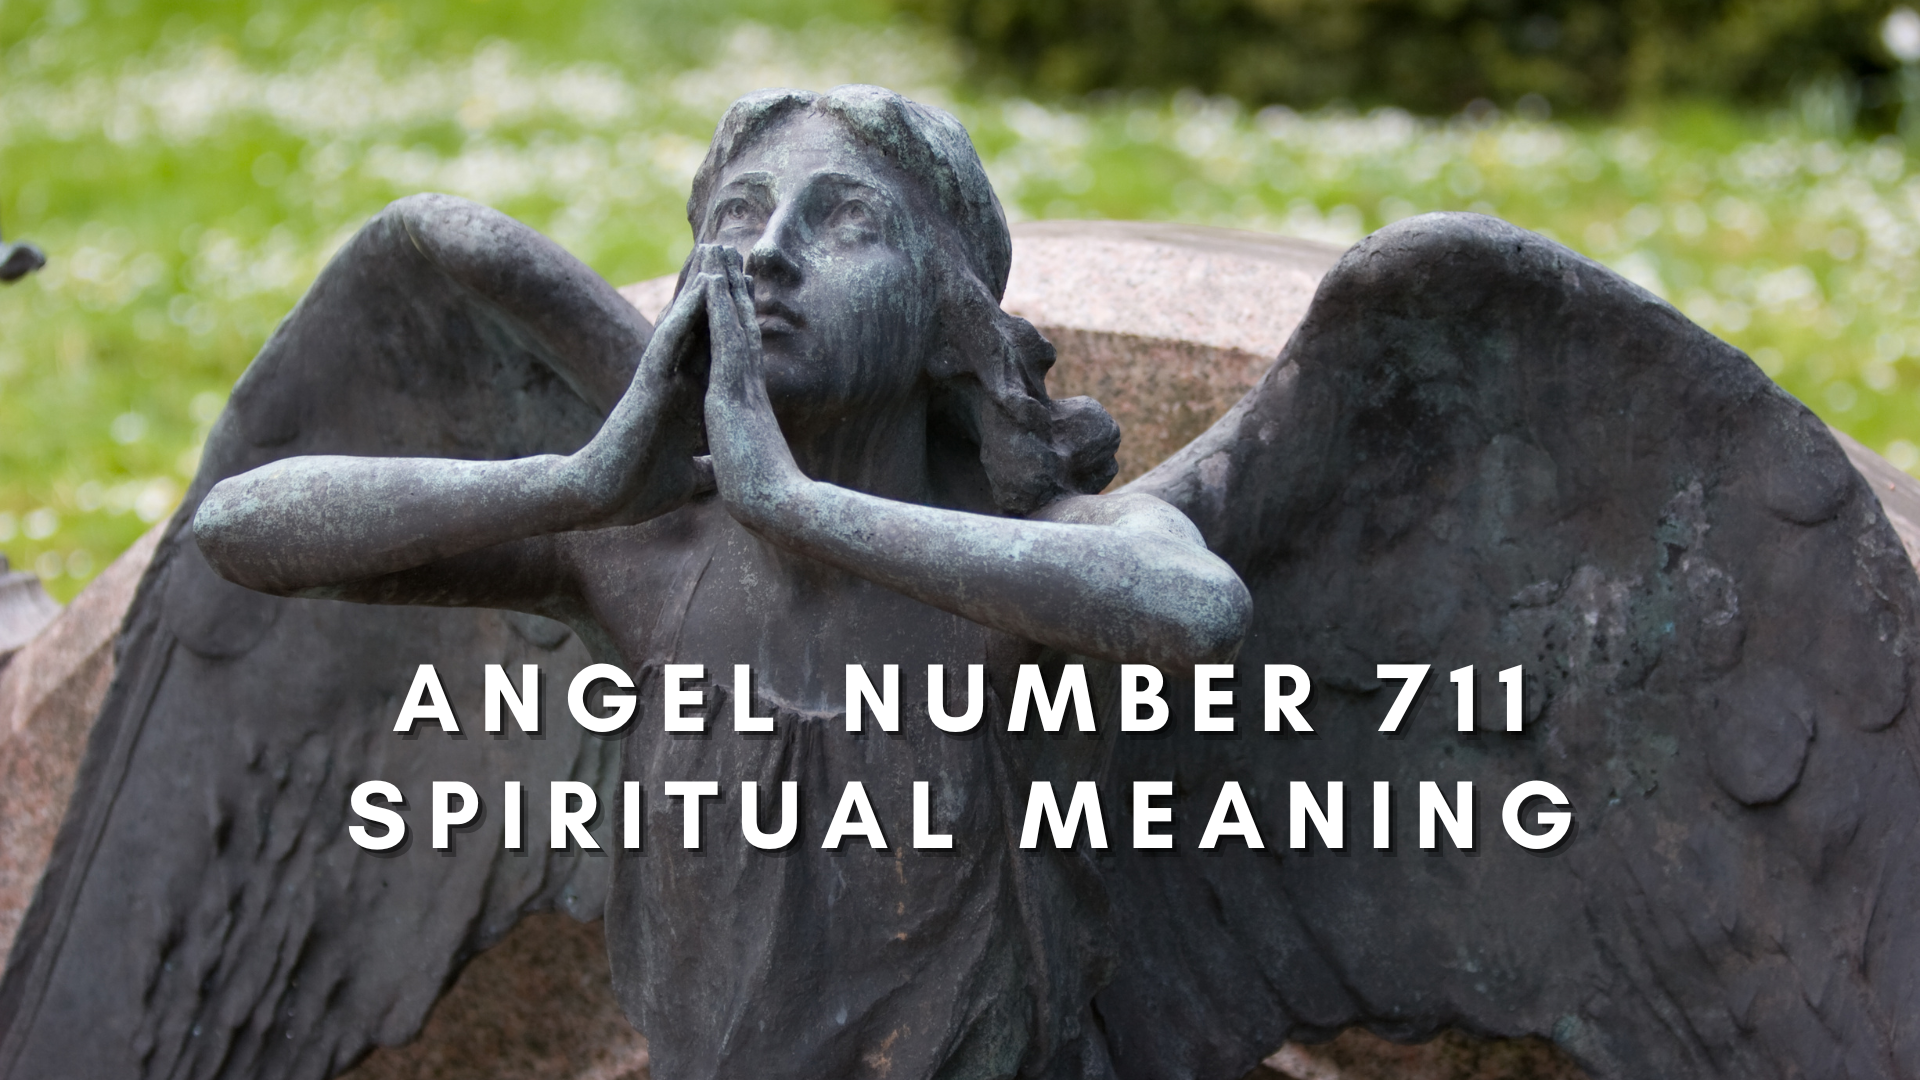 A praying angel statue with words Angel Number 711 Spiritual Meaning